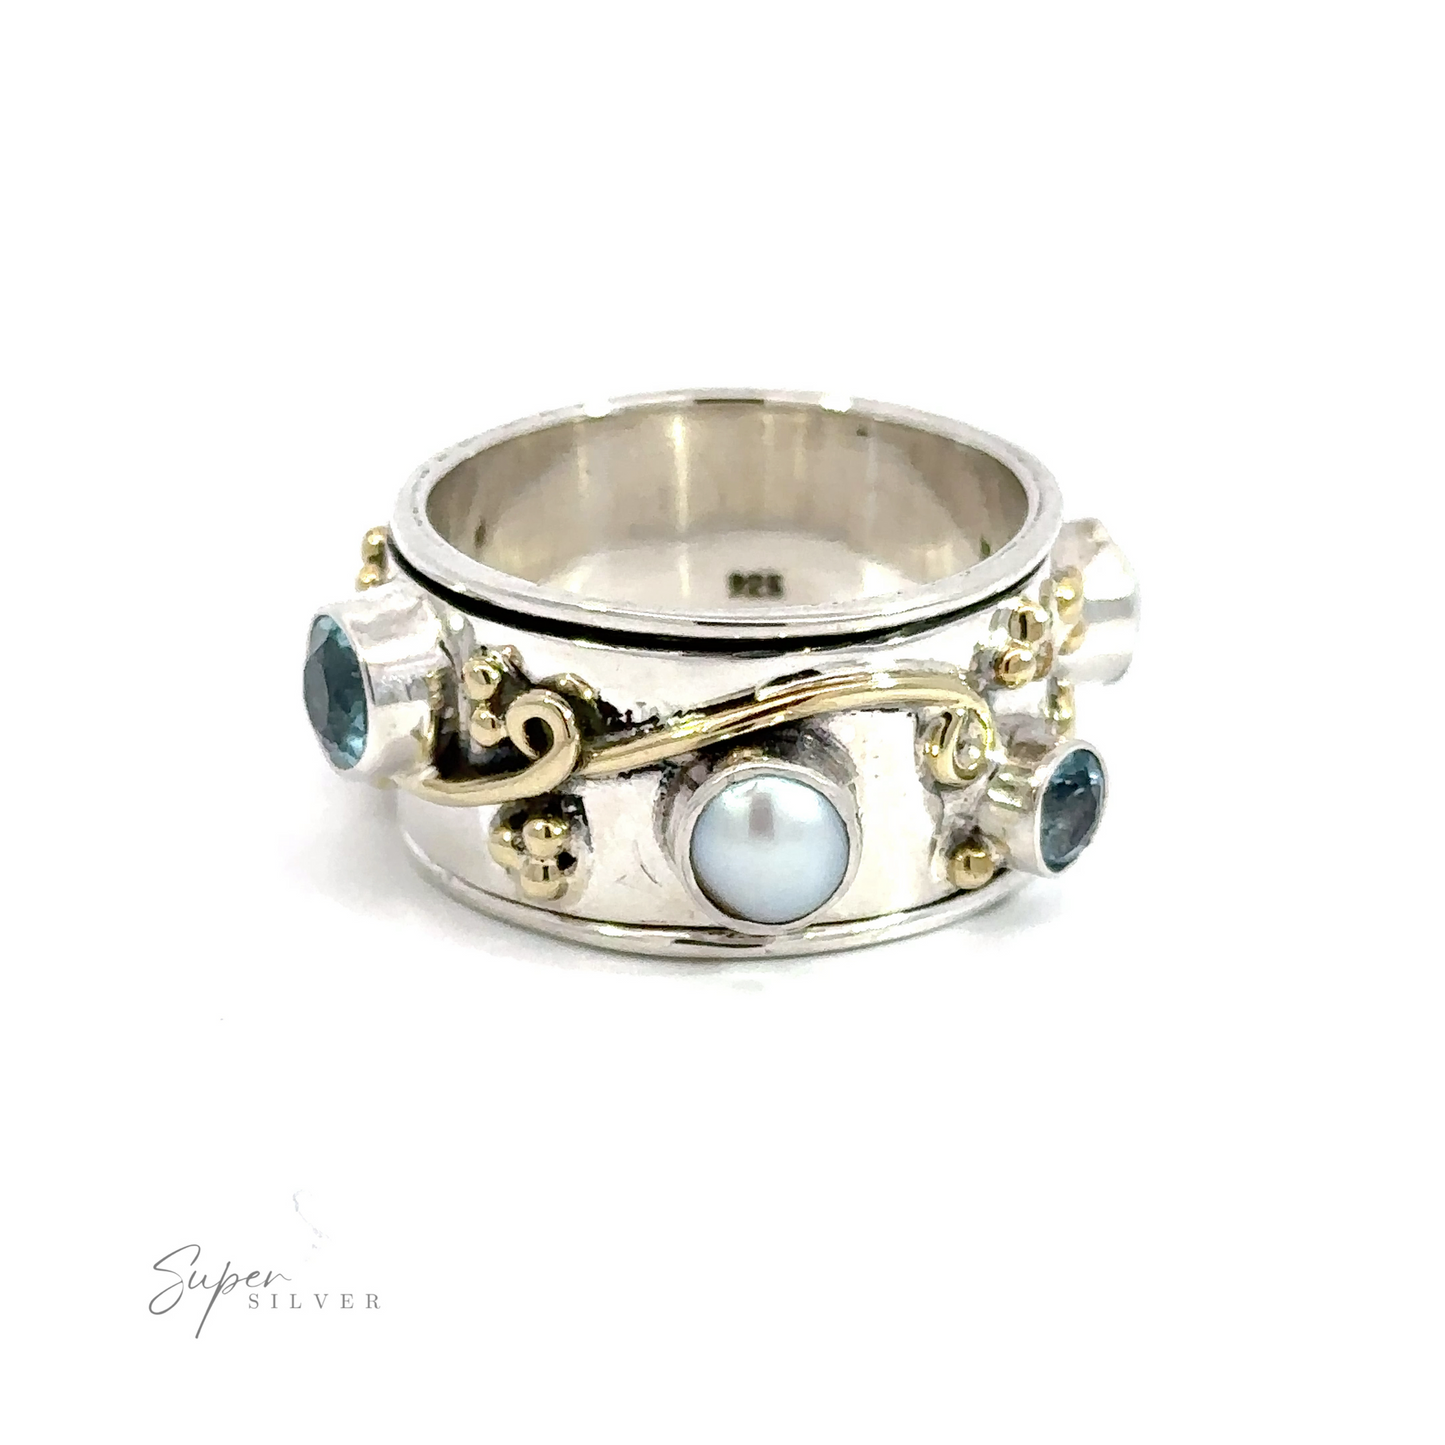 A Pearl and Blue Topaz Spinner with Gold Accents adorned with delicate pearls and a vibrant blue topaz.